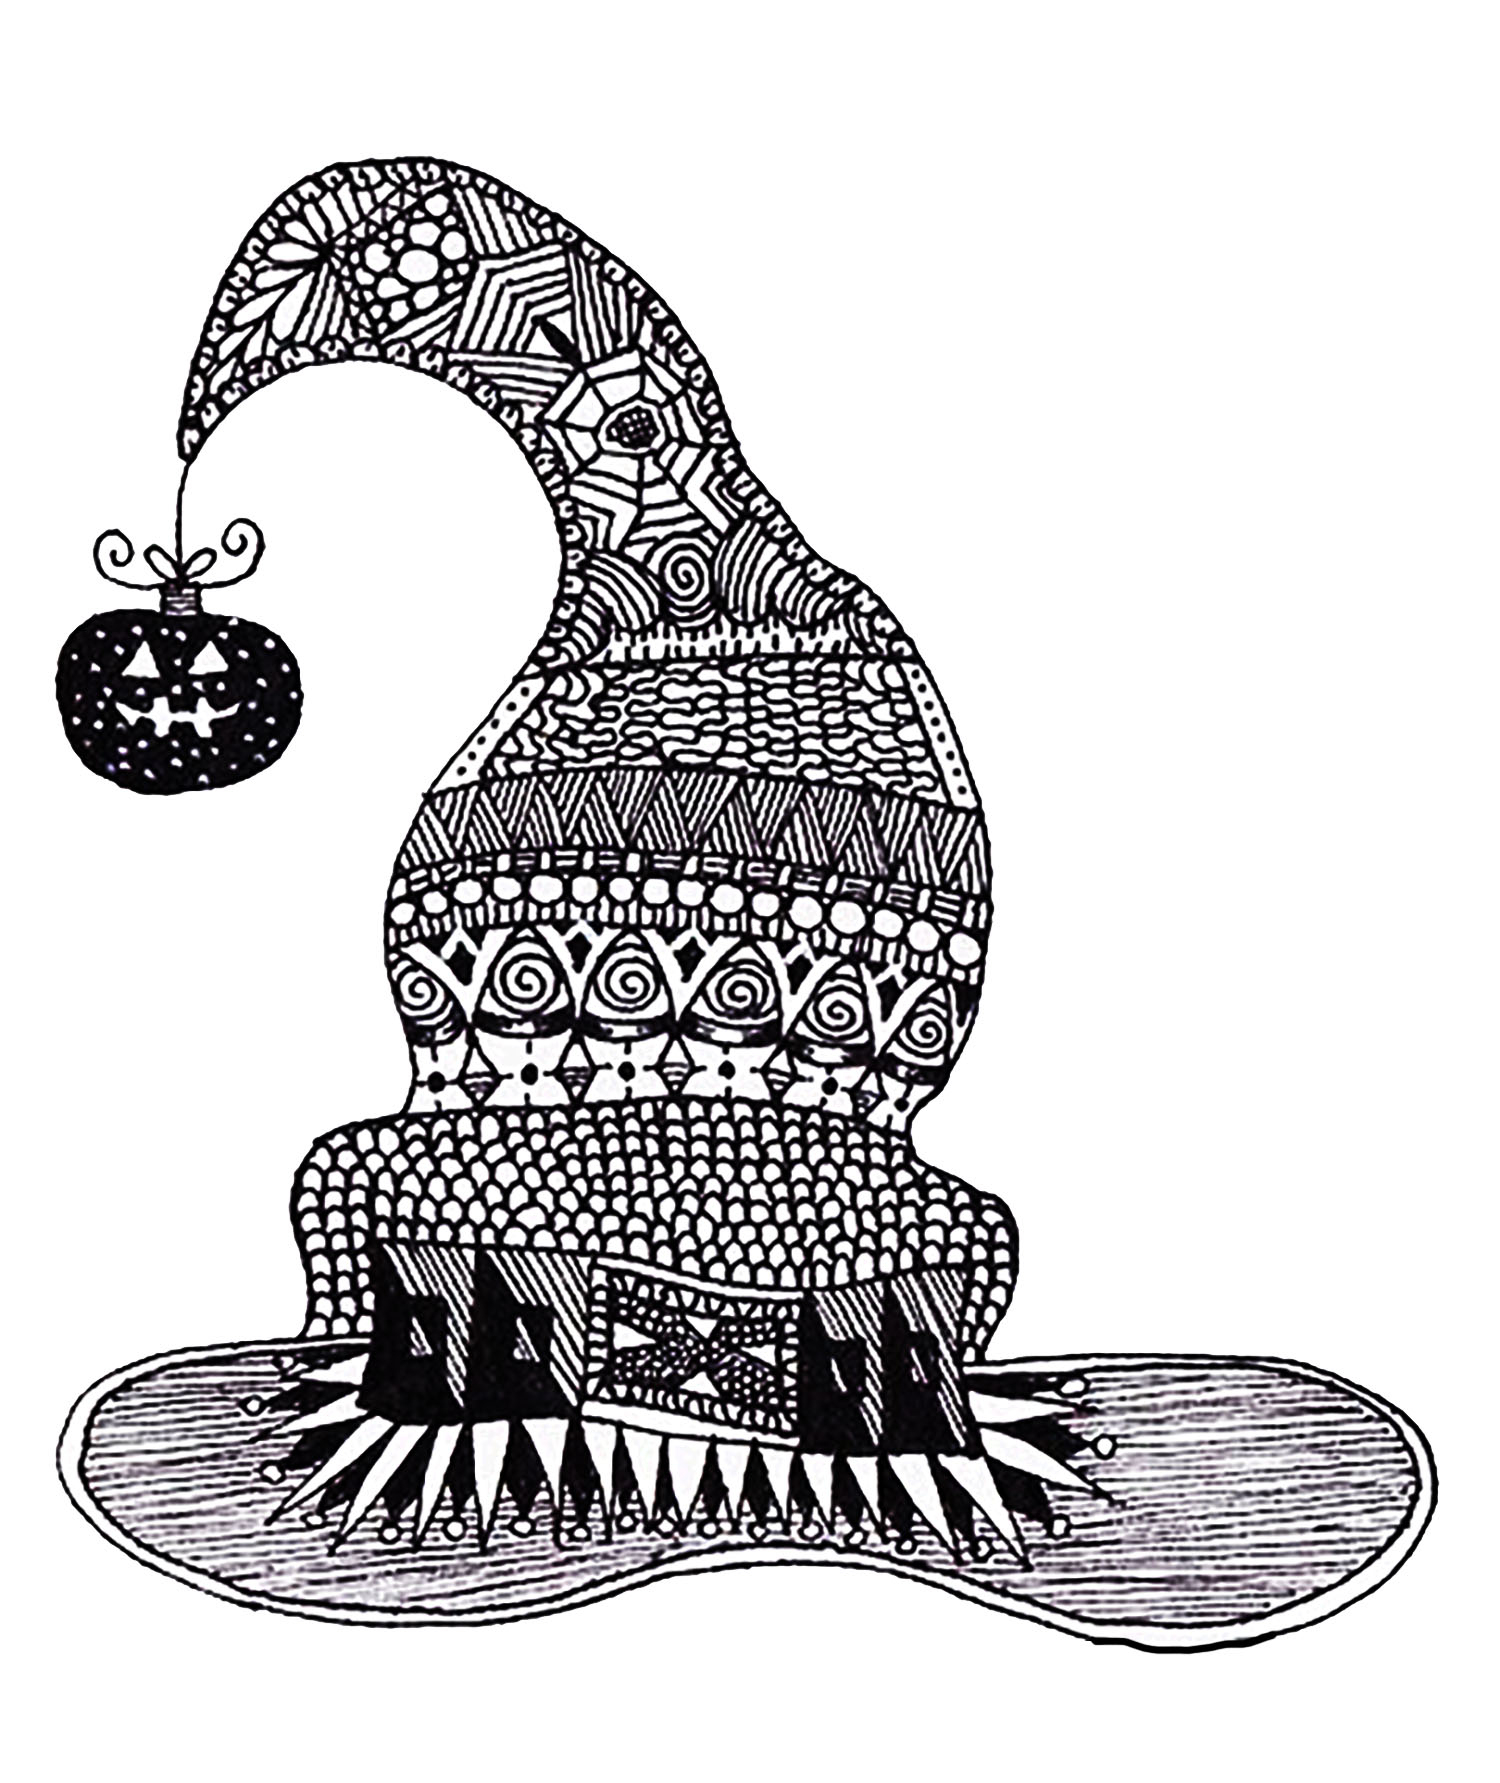 Halloween Zentangle Witch Hat - Halloween Adult Coloring Pages encequiconcerne Dessin Halloween 